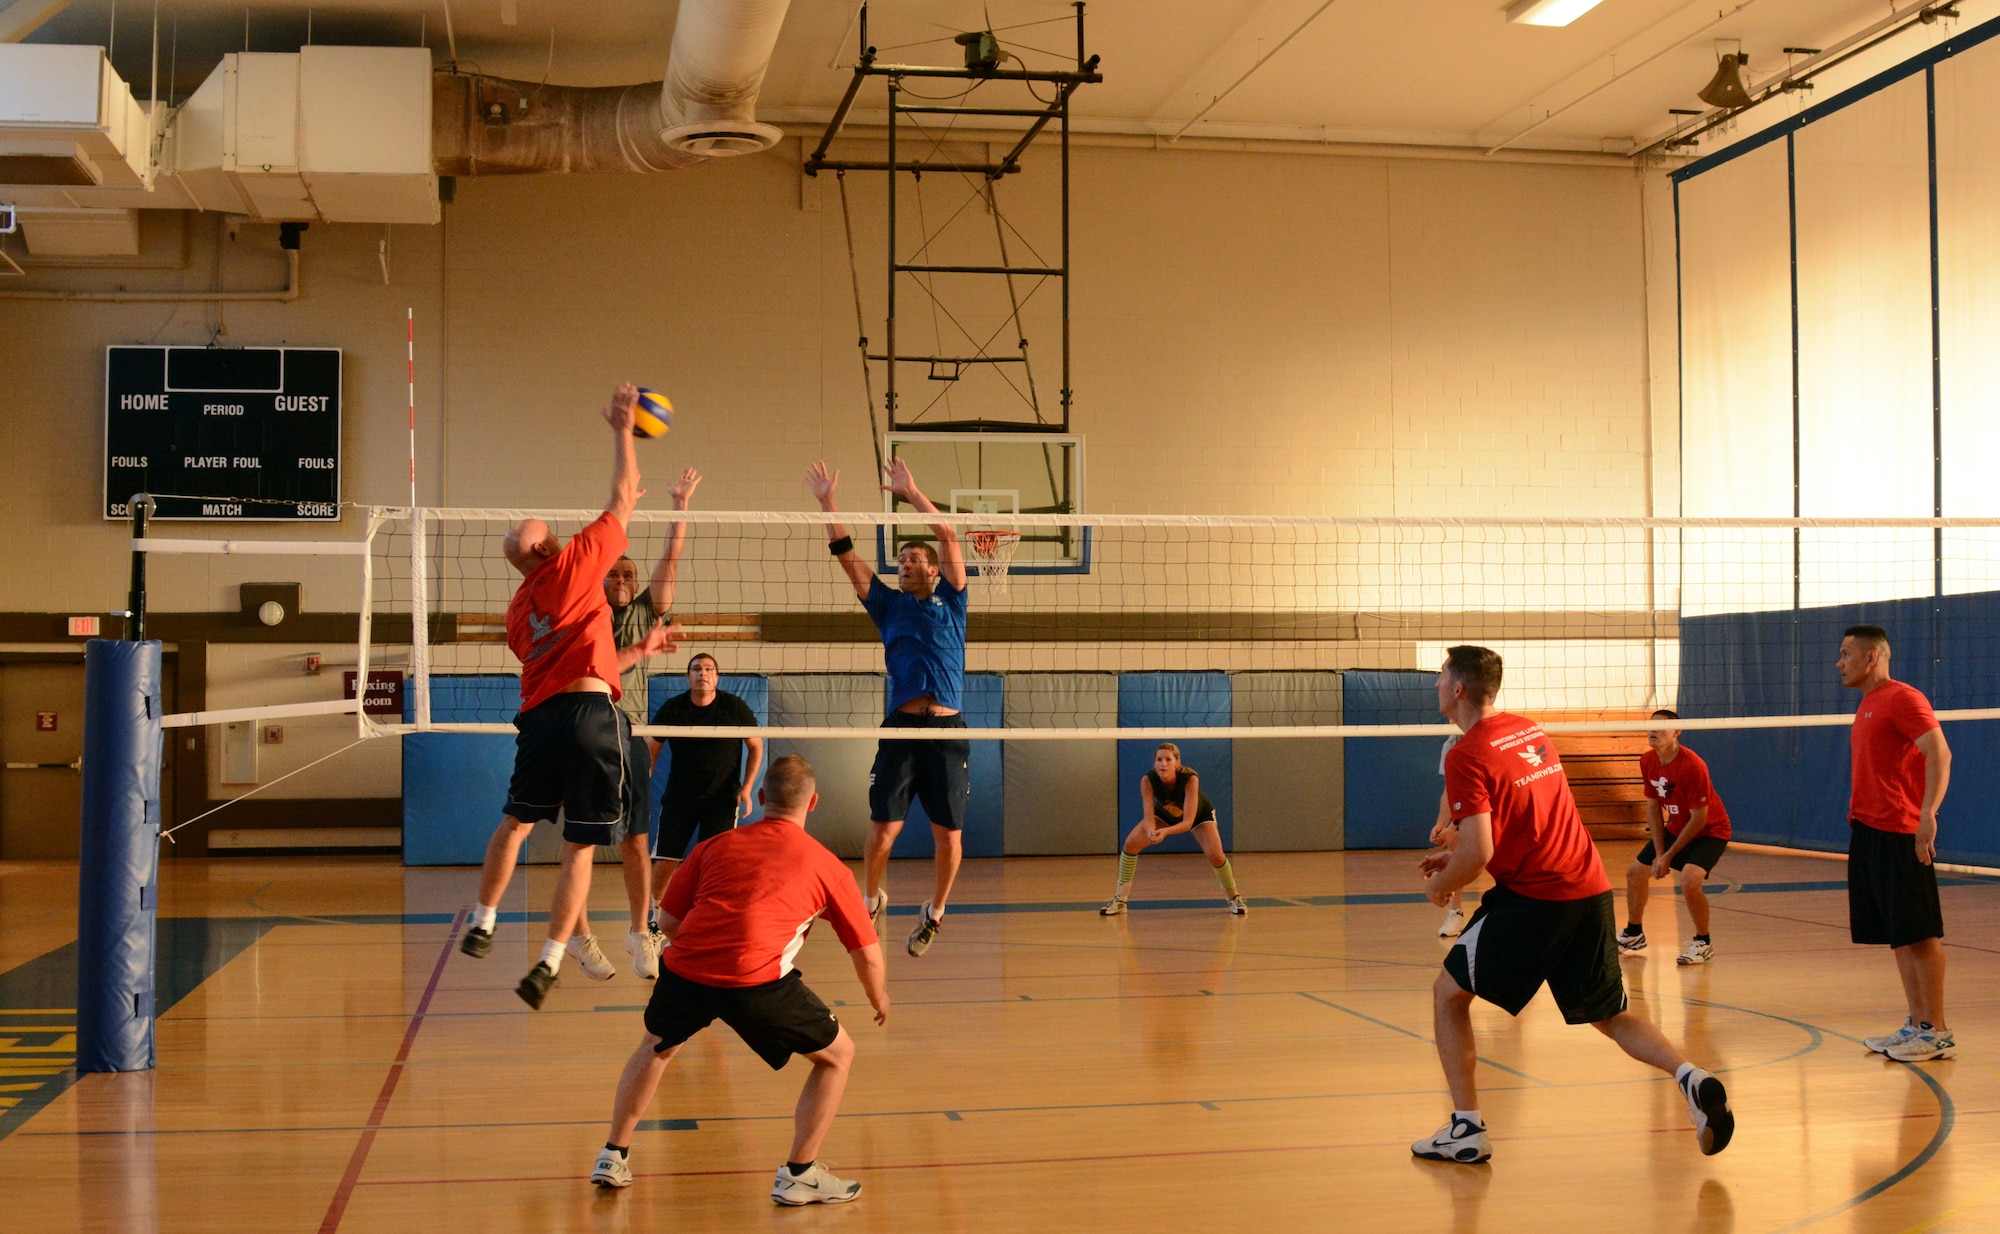 Col. Wayne Straw, Squadron Officer College,( in red) spikes the ball past  Maj. Greg Preisser (in grey) Maj. Eric Fleming (in blue), both from the Air Command and Staff College during the 2014 Maxwell-Gunter Air Force Base intramural volleyball championship, May 6, 2014. The intramural league is designed to help build cohesion and improve morale within units and among service members on base. (U.S. Air Force Photo by Staff Sgt. Gregory Brook)